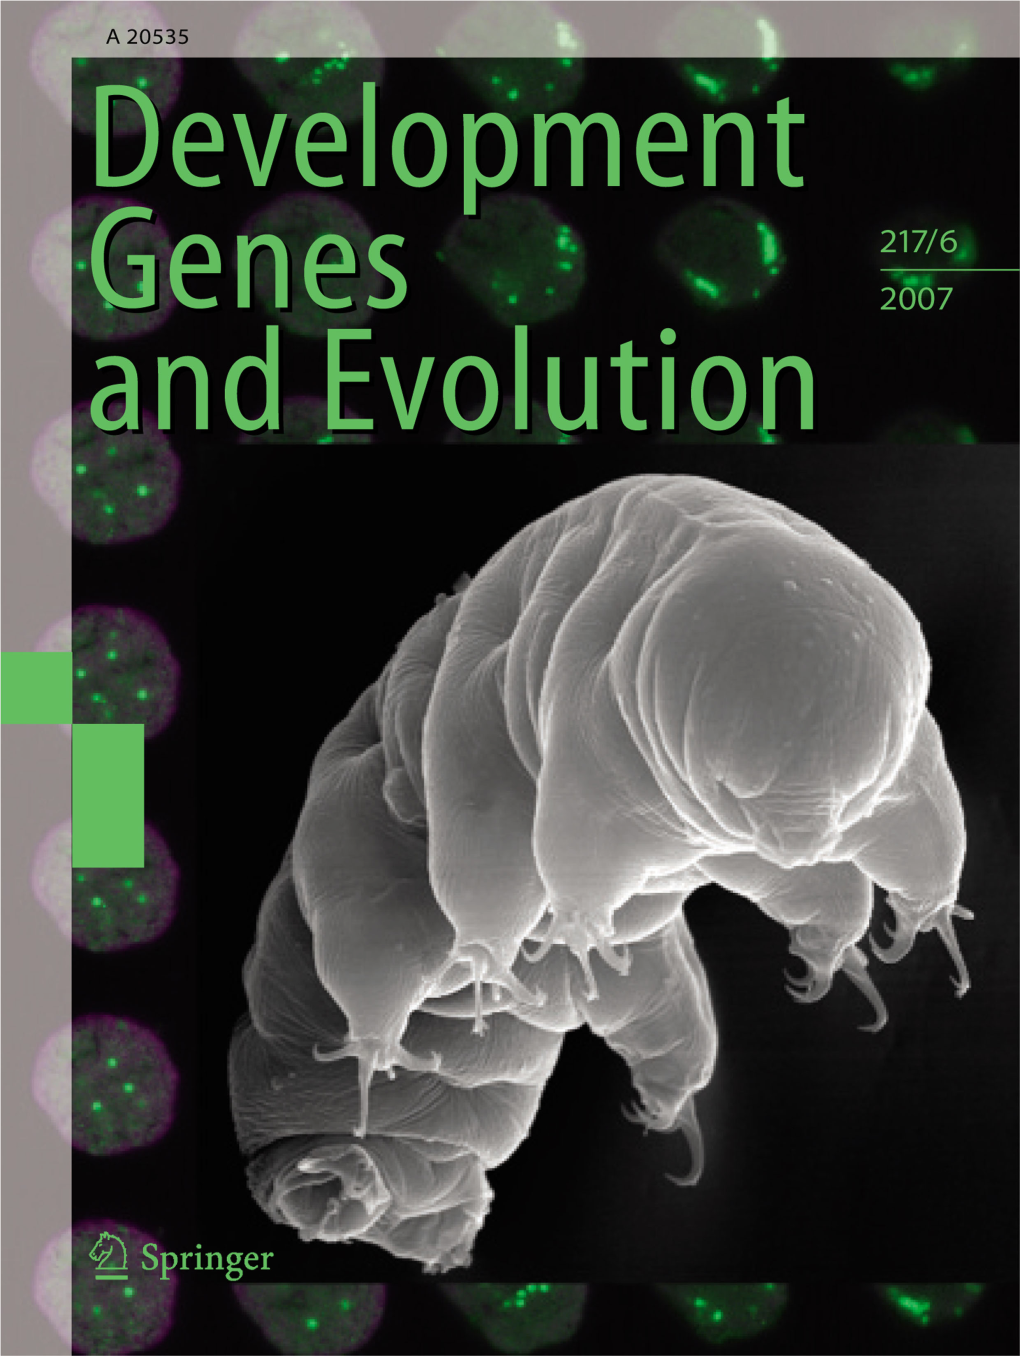 Segmental Expression of Pax3/7 and Engrailed Homologs in Tardigrade Development